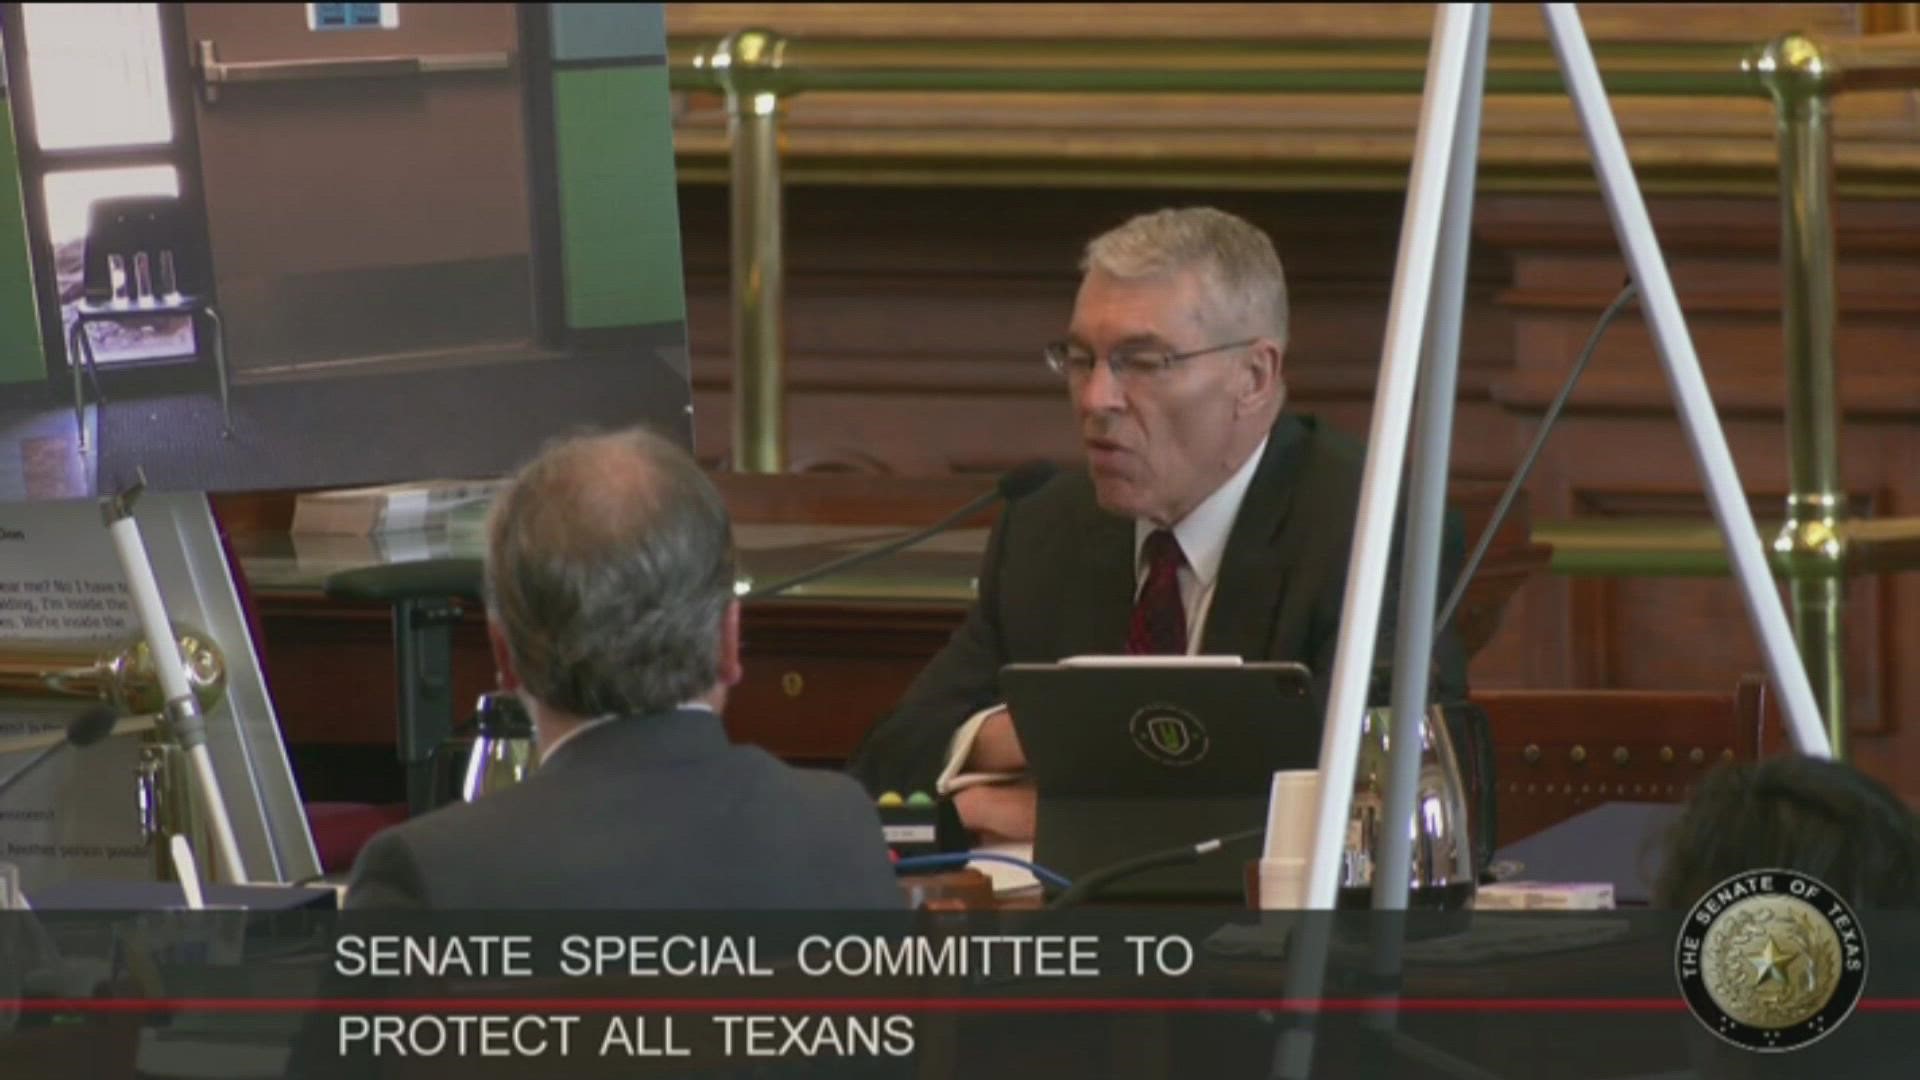 The head of the Texas Department of Public Safety testified before the Special Committee to Protect All Texans.